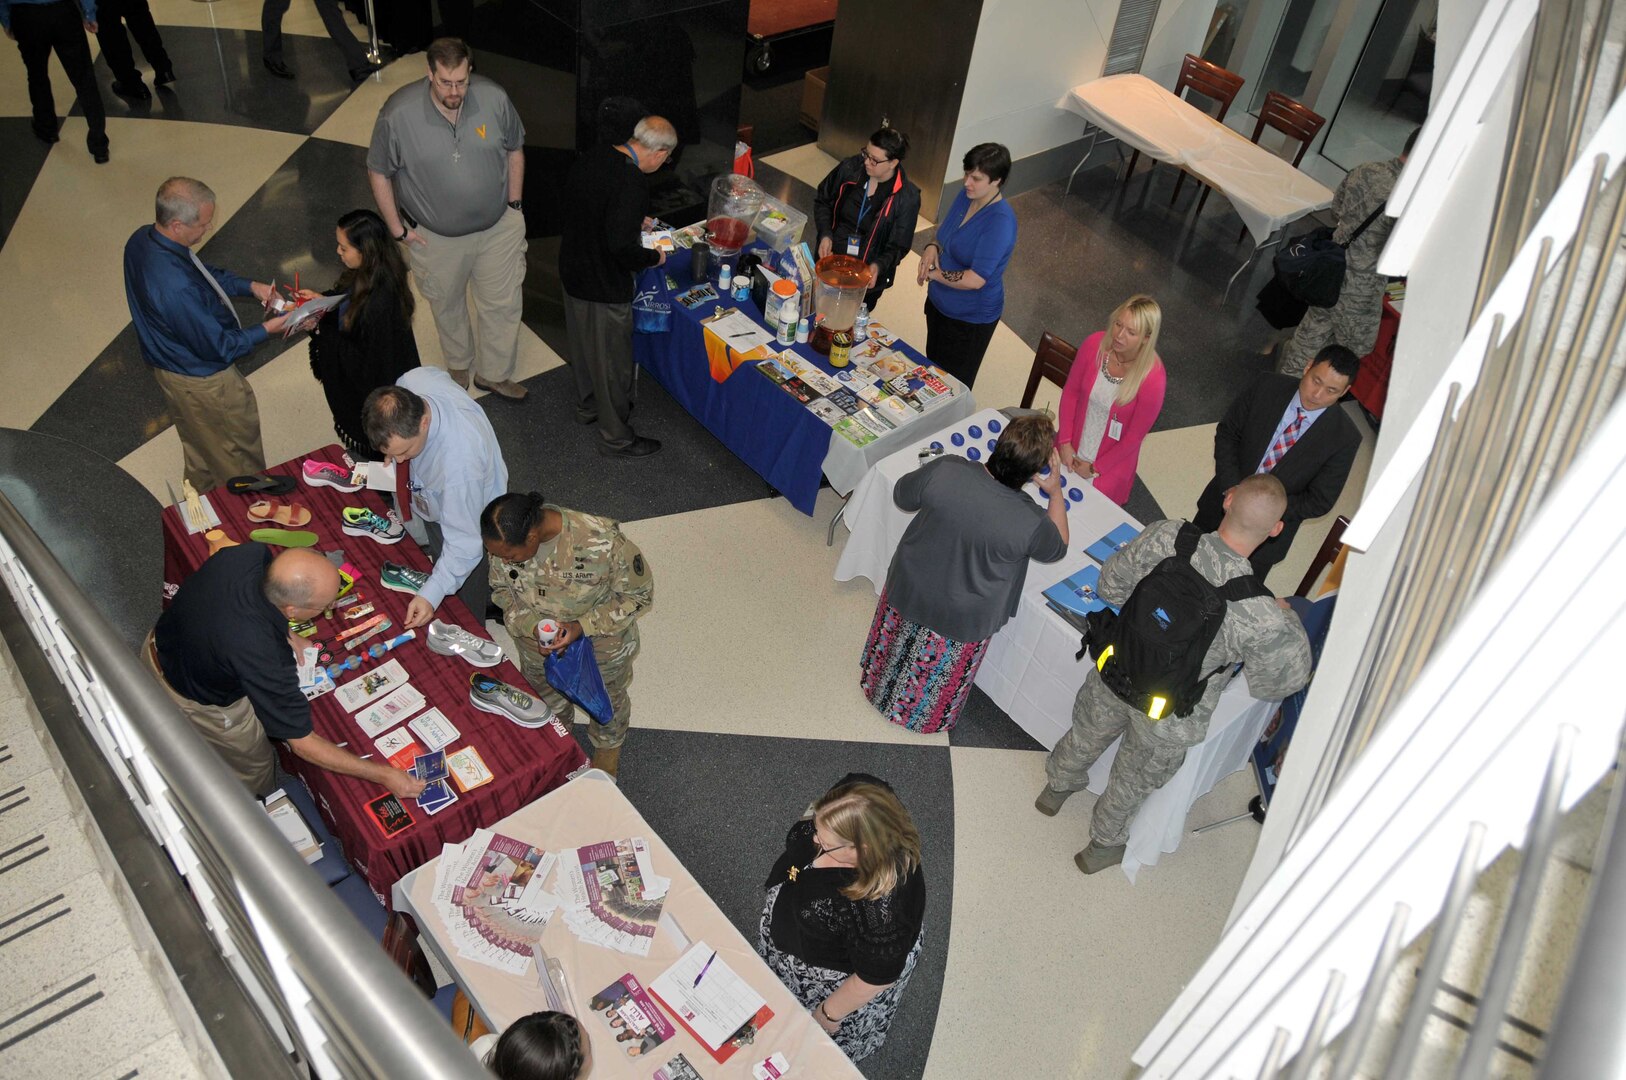 McNamara HQC employees gather information from vendors at the Annual Health and Safety Expo, May 11 in the HQC Café.